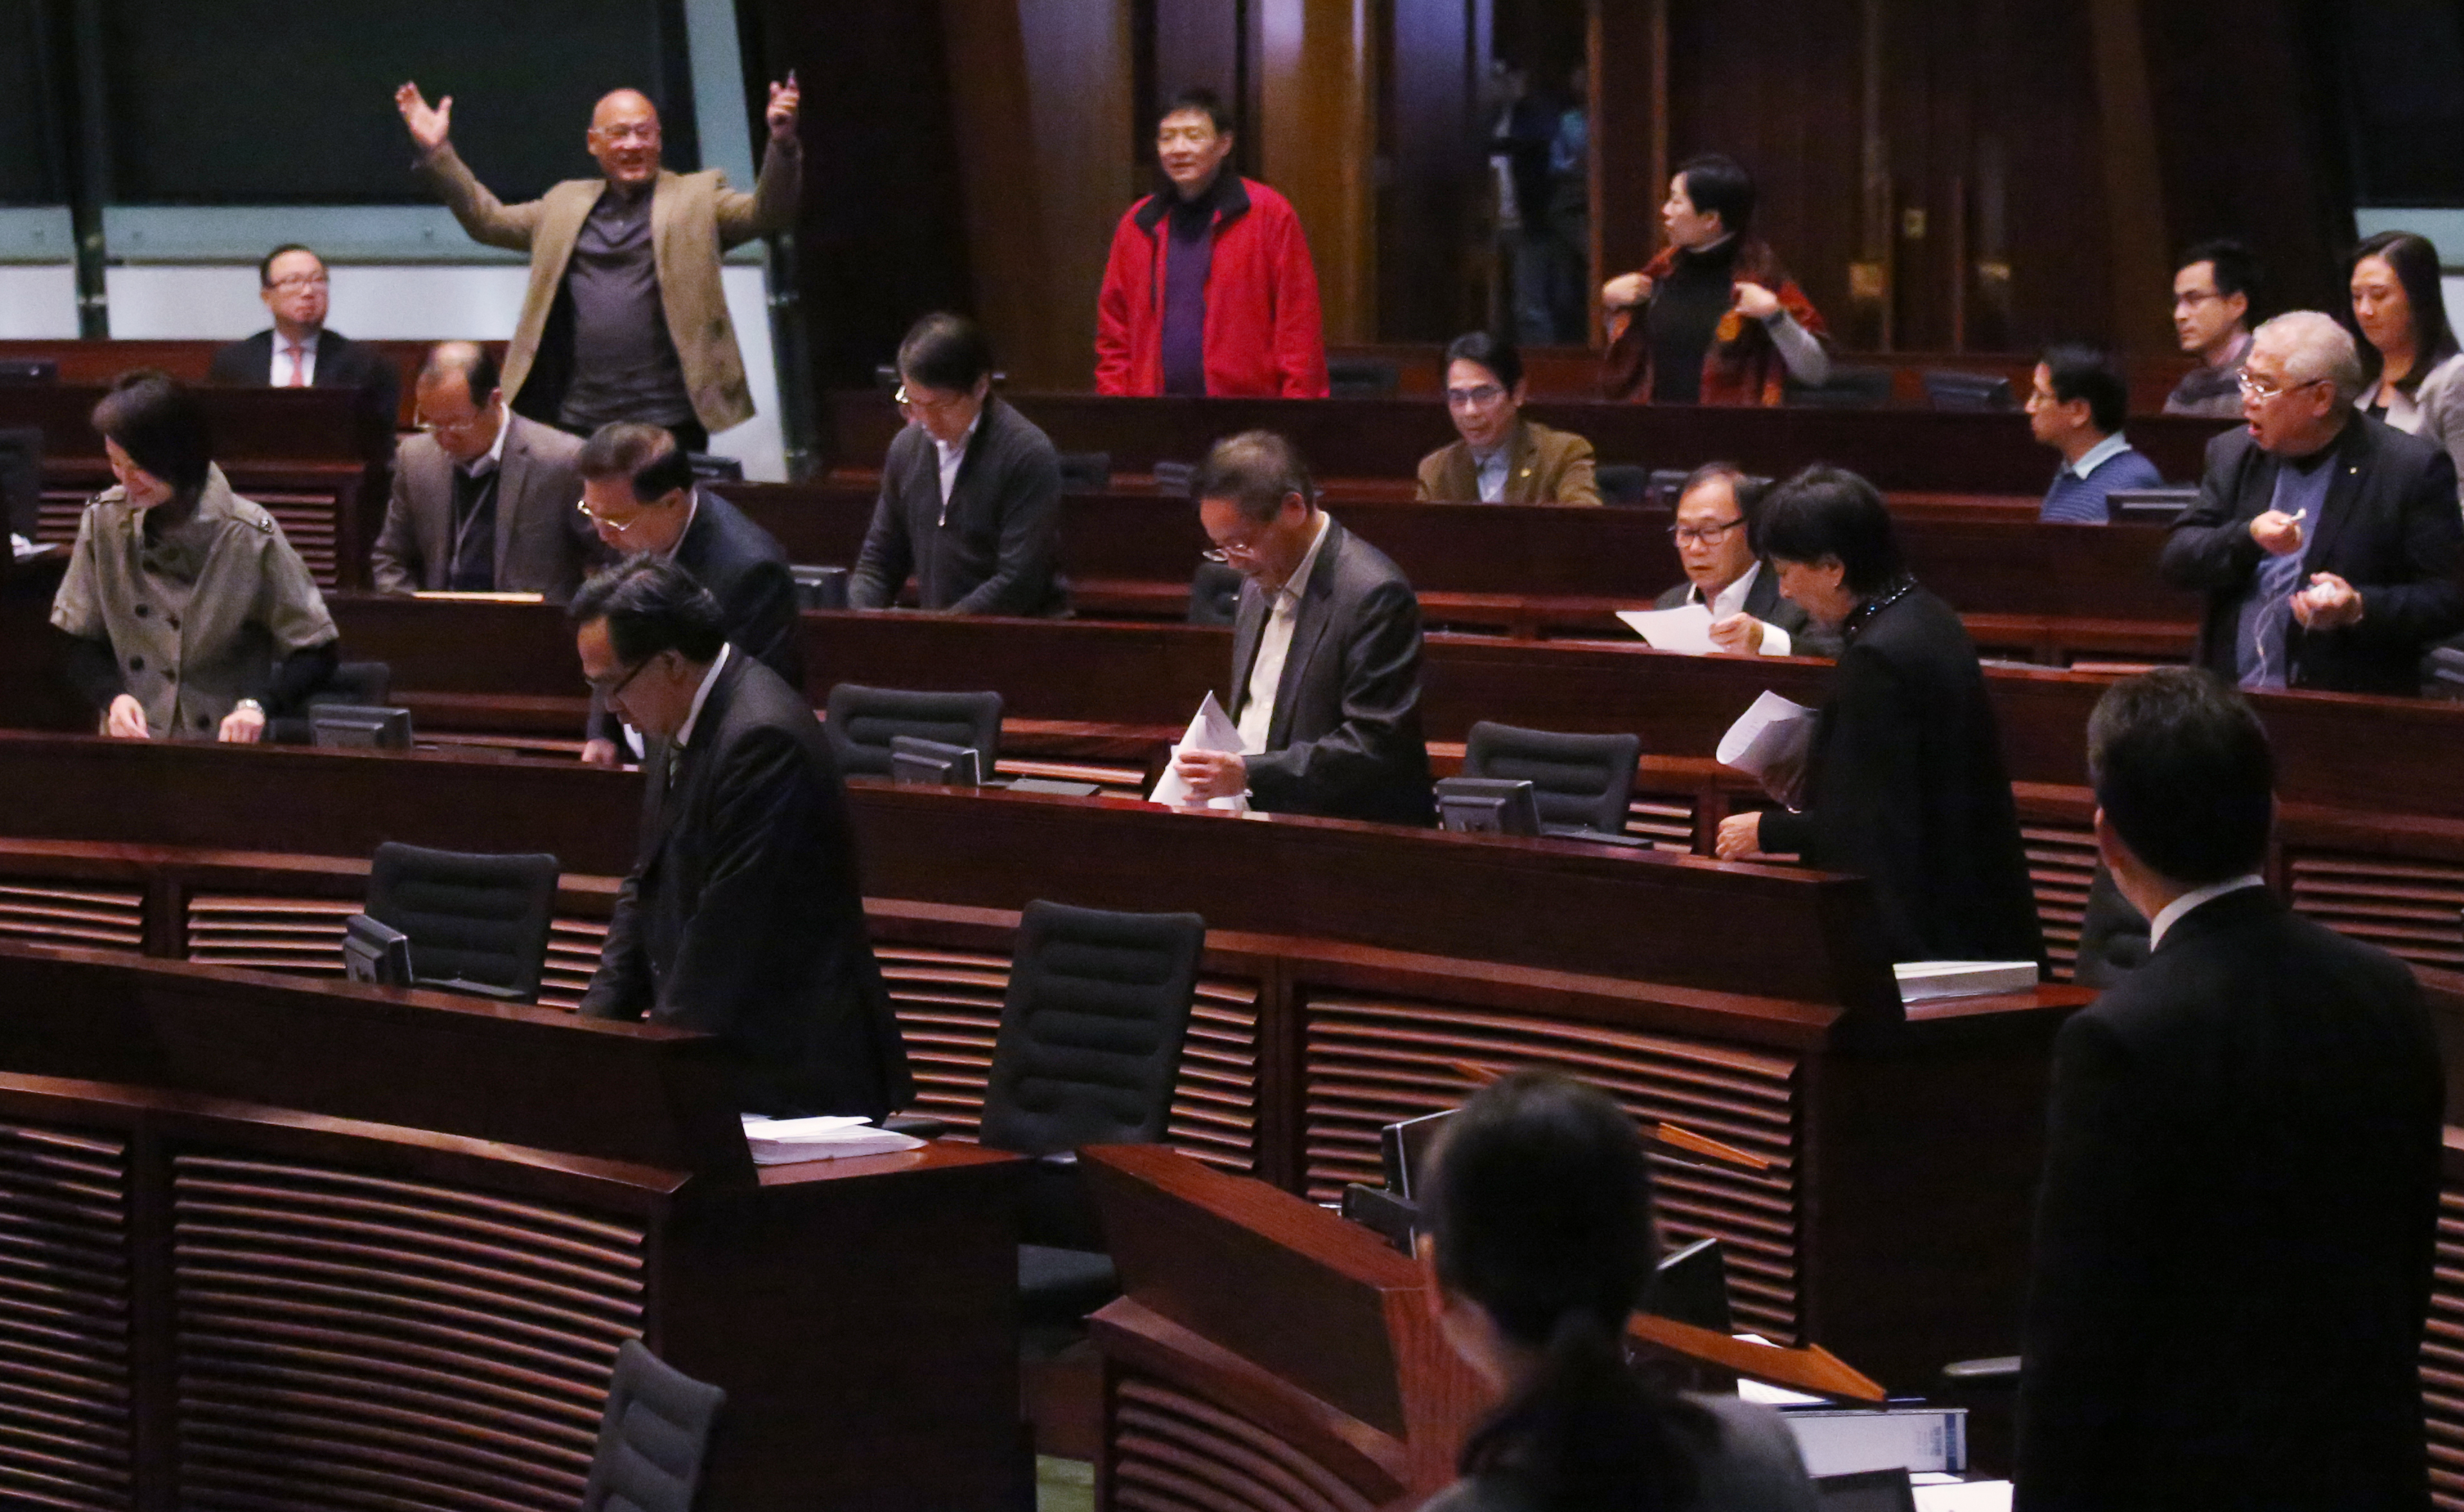 Legislator Albert Chan Wai-yip (upper left corner) gestures after the Legco meeting on second reading of the controversial Copyright (Amendment) Bill in Legco Chamber in Tamar has been stopped. The meeting was adjourned due to the lack of quorum. 07JAN16 SCMP/Nora Tam